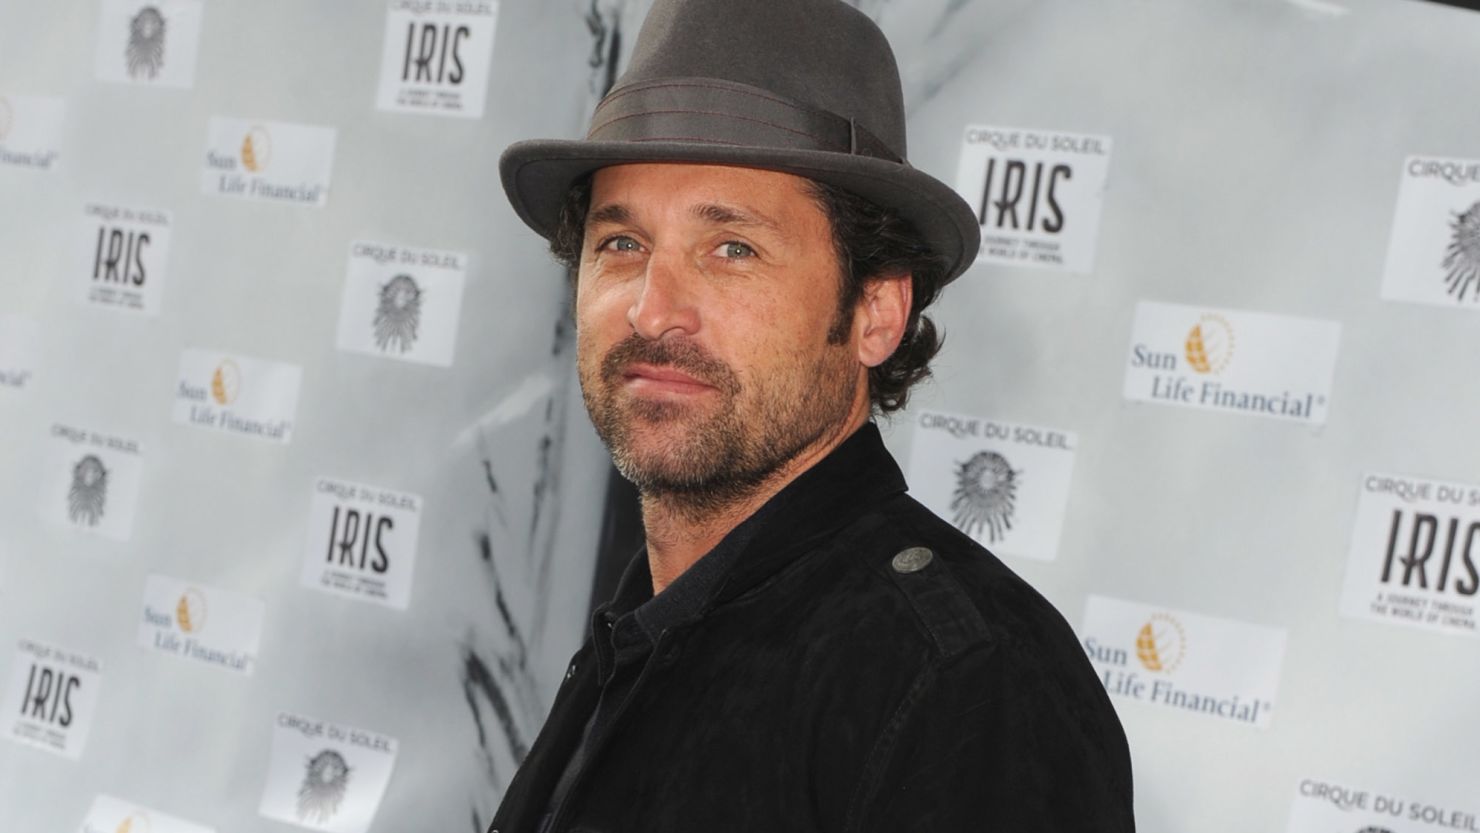 Actor Patrick Dempsey said he and a group of investors wants to save 500 jobs by purchasing Tully's Coffee, a struggling chain. 